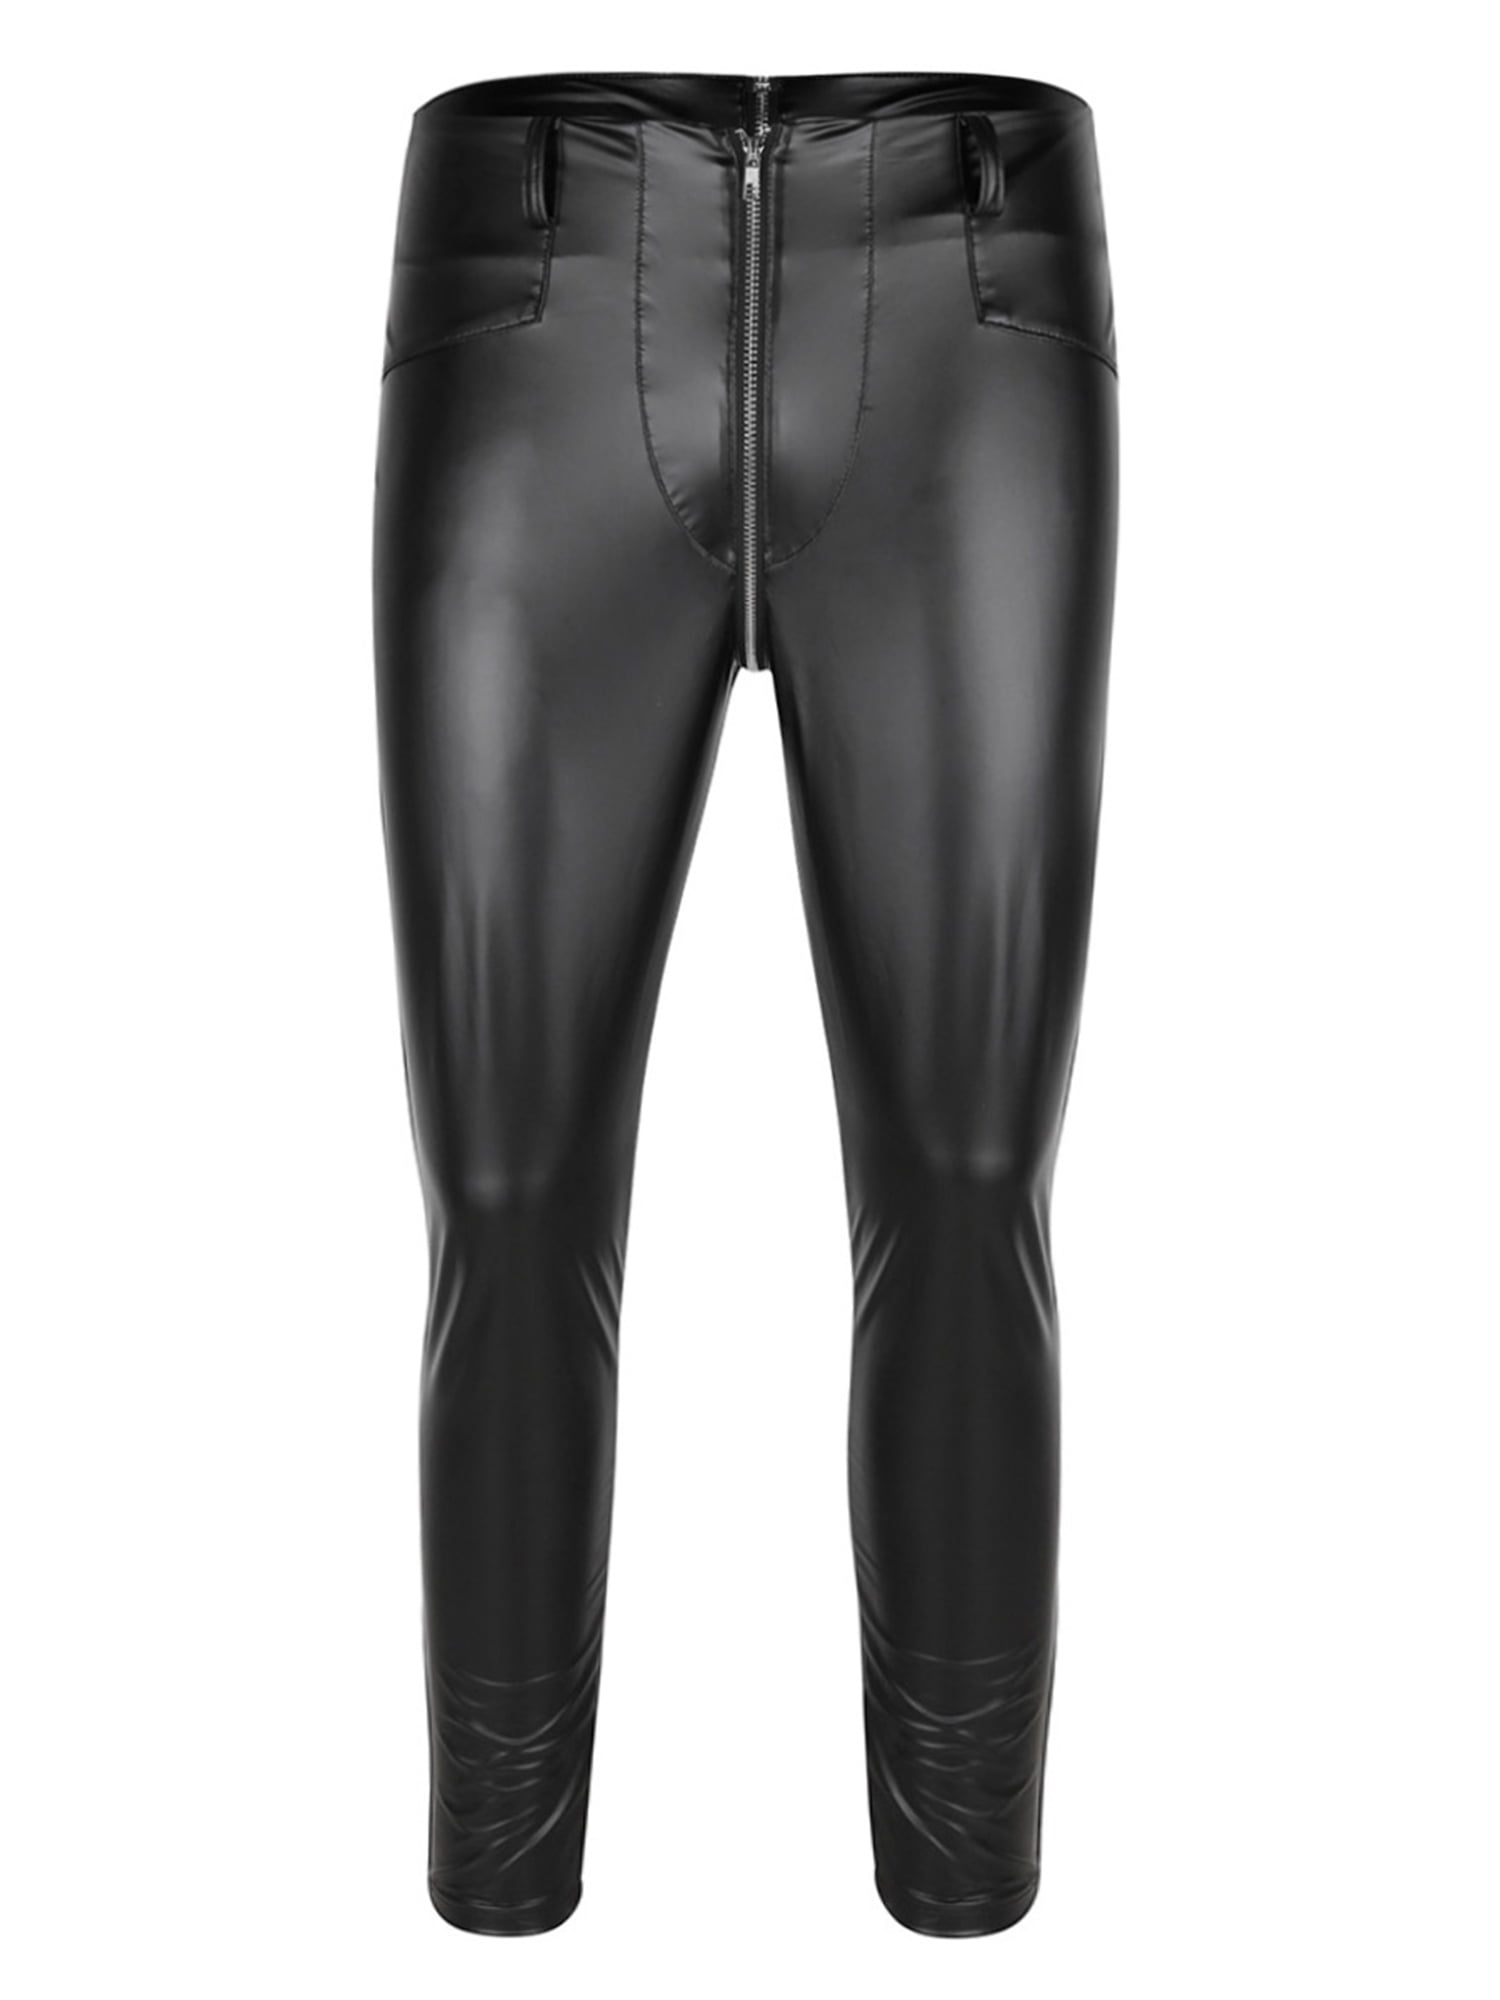 Heart move low price Mens Soft Faux Leather Tight Pants Stretchy ...